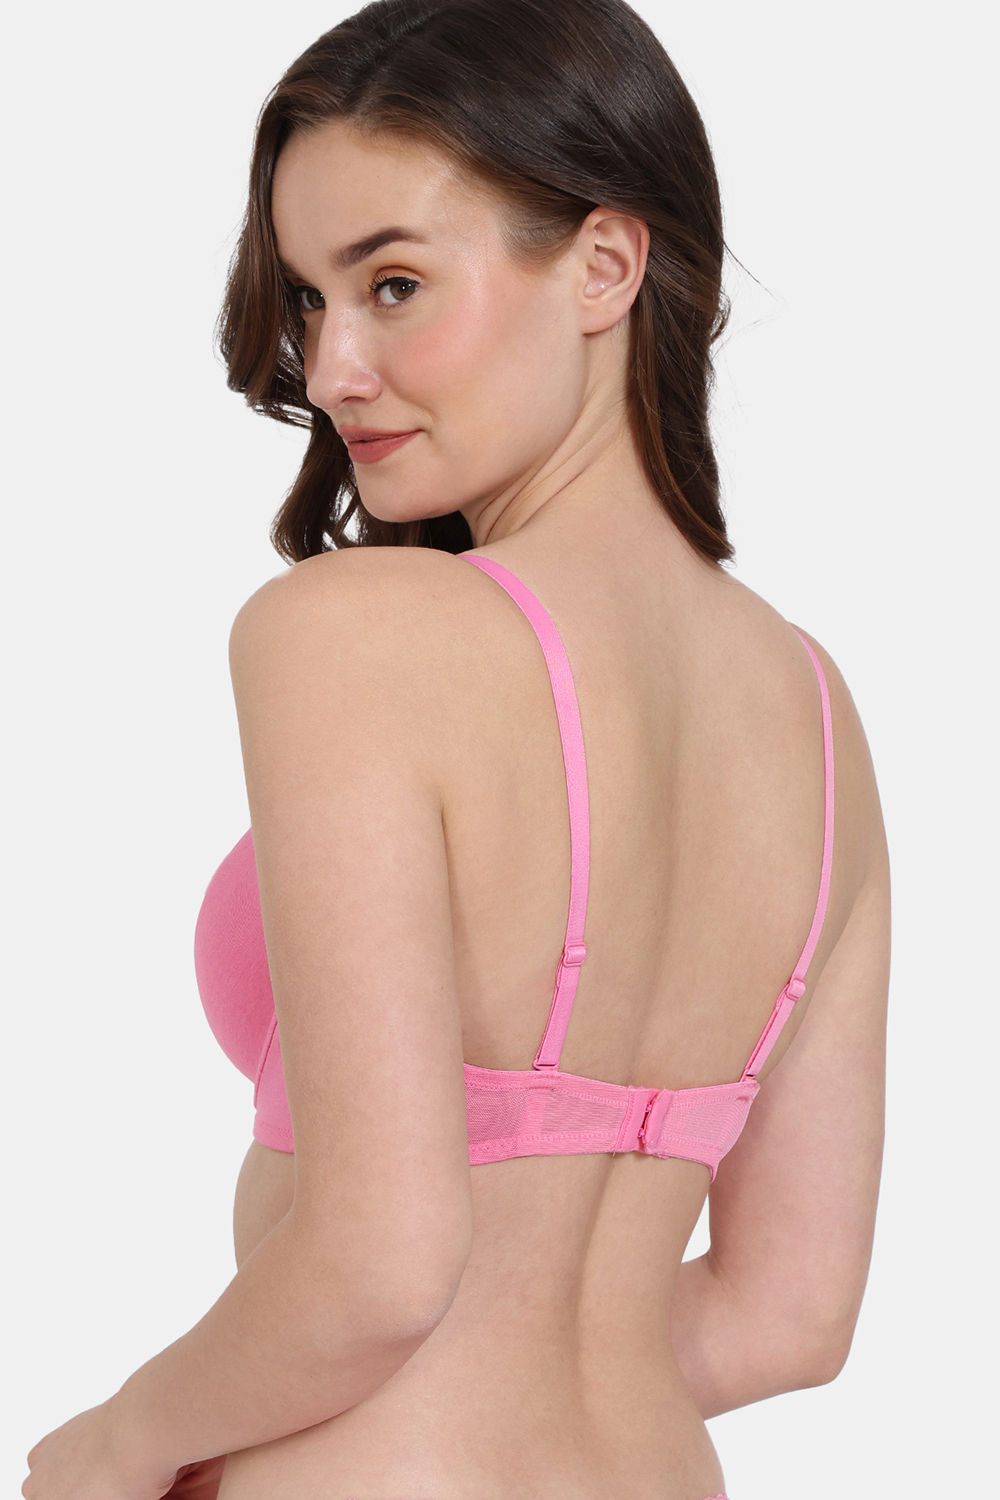 Buy Zivame Women's Polyester Wired Classic Seamless Bra  (ZI10UPFASHAPINK0034D_Pink_34D) at